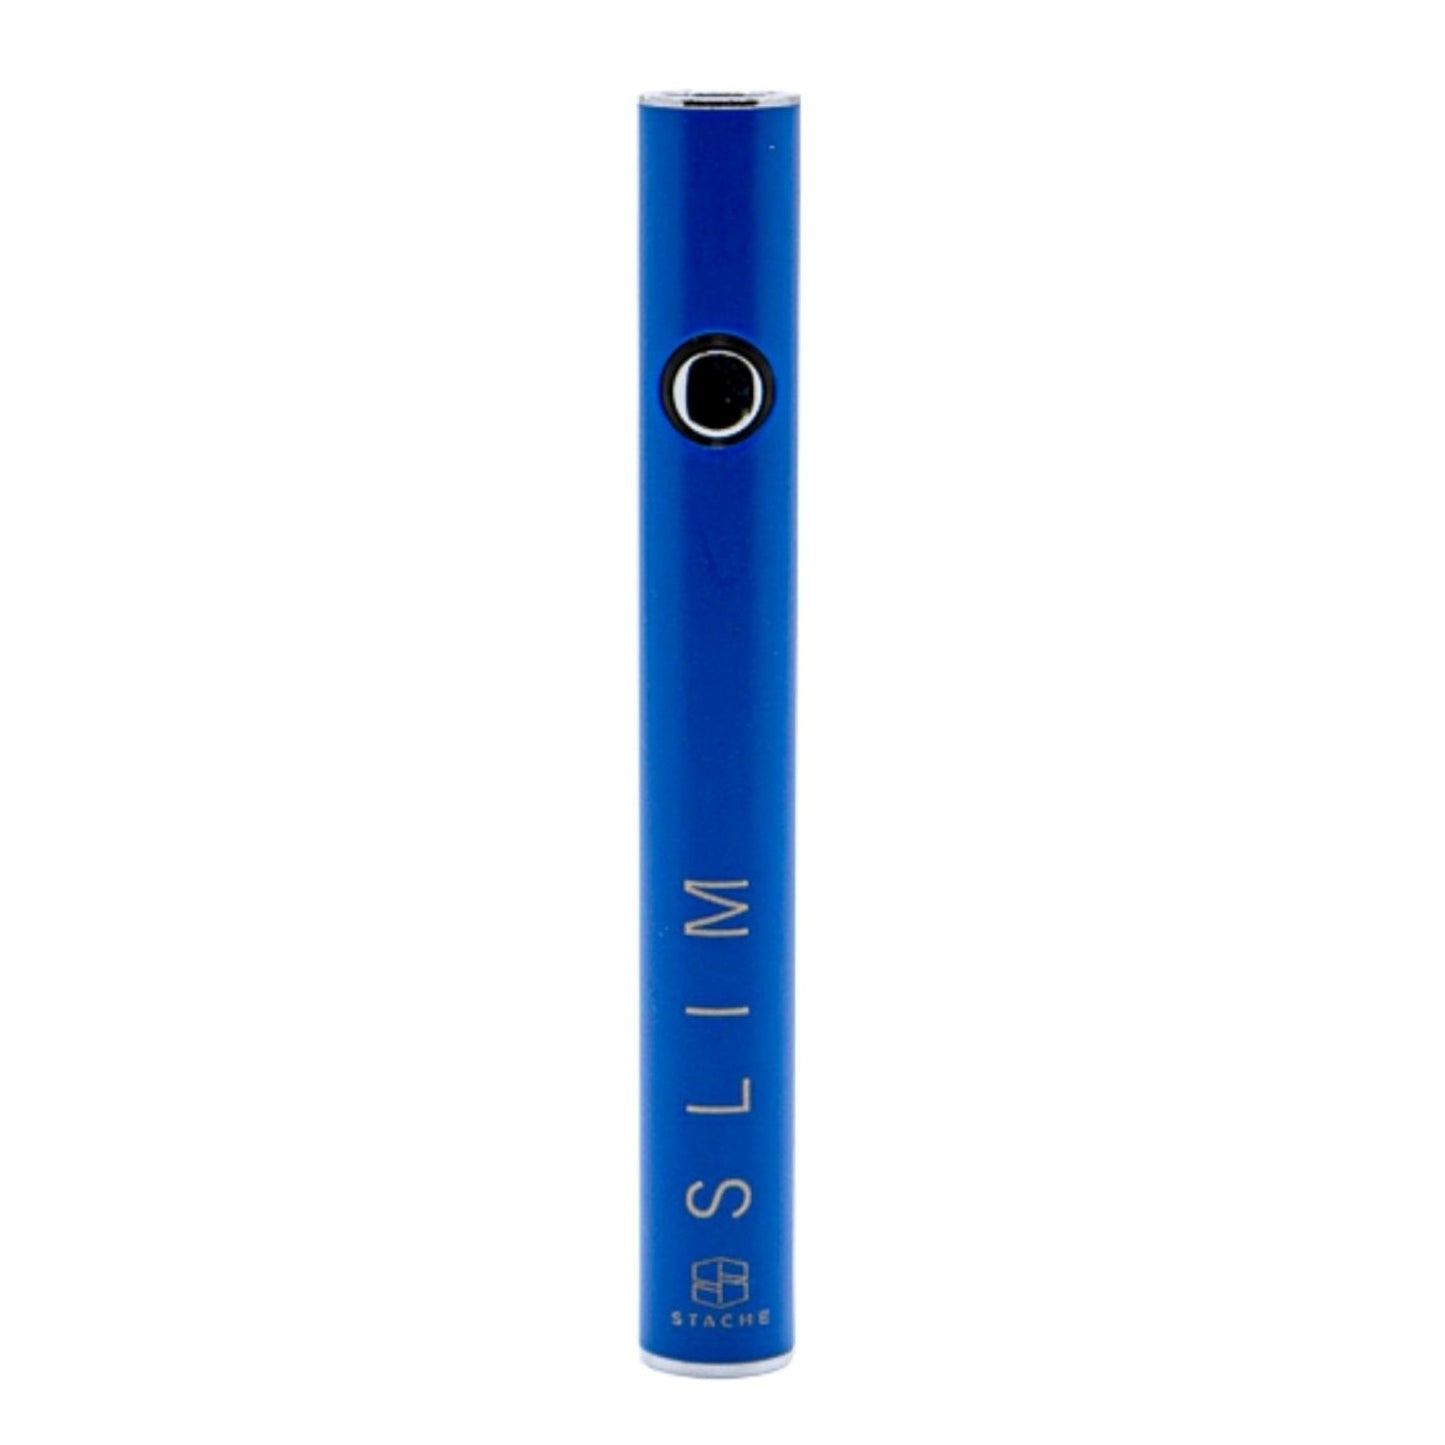 Stache Products Slim 510-Thread Vaporizer Pen Battery 🔋 by Stache Products | Mission Dispensary